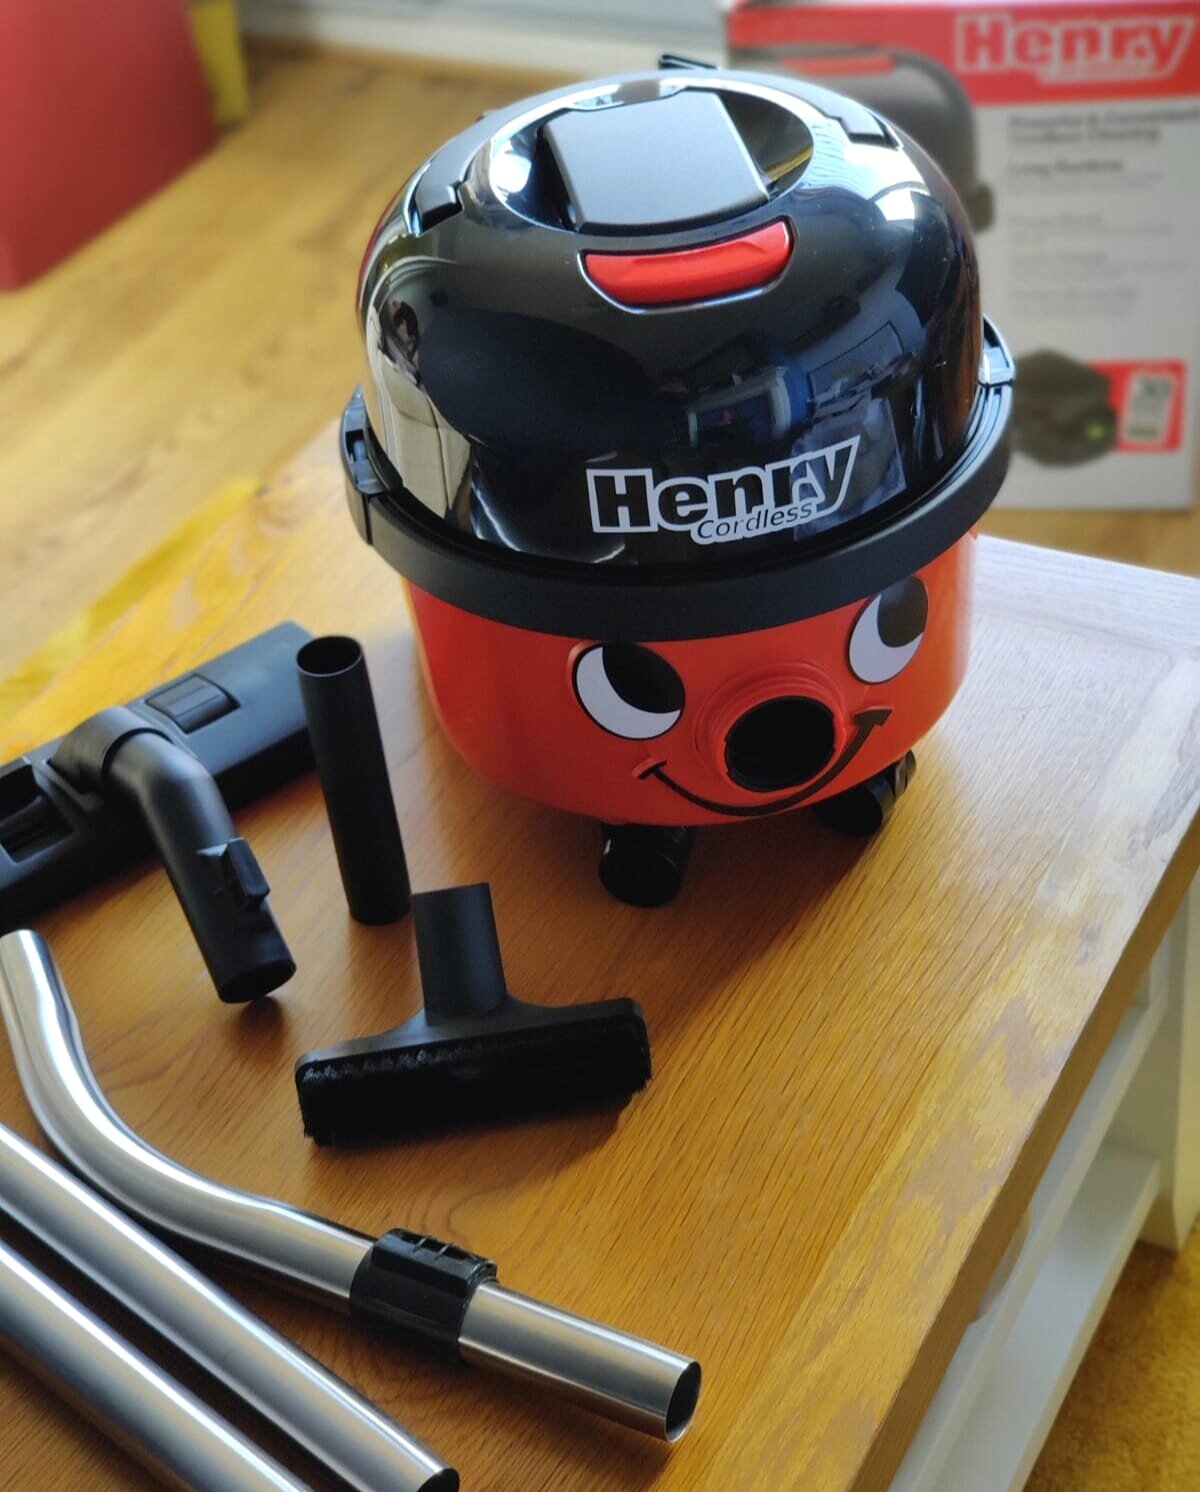 Henry Cordless Vaccuum Review